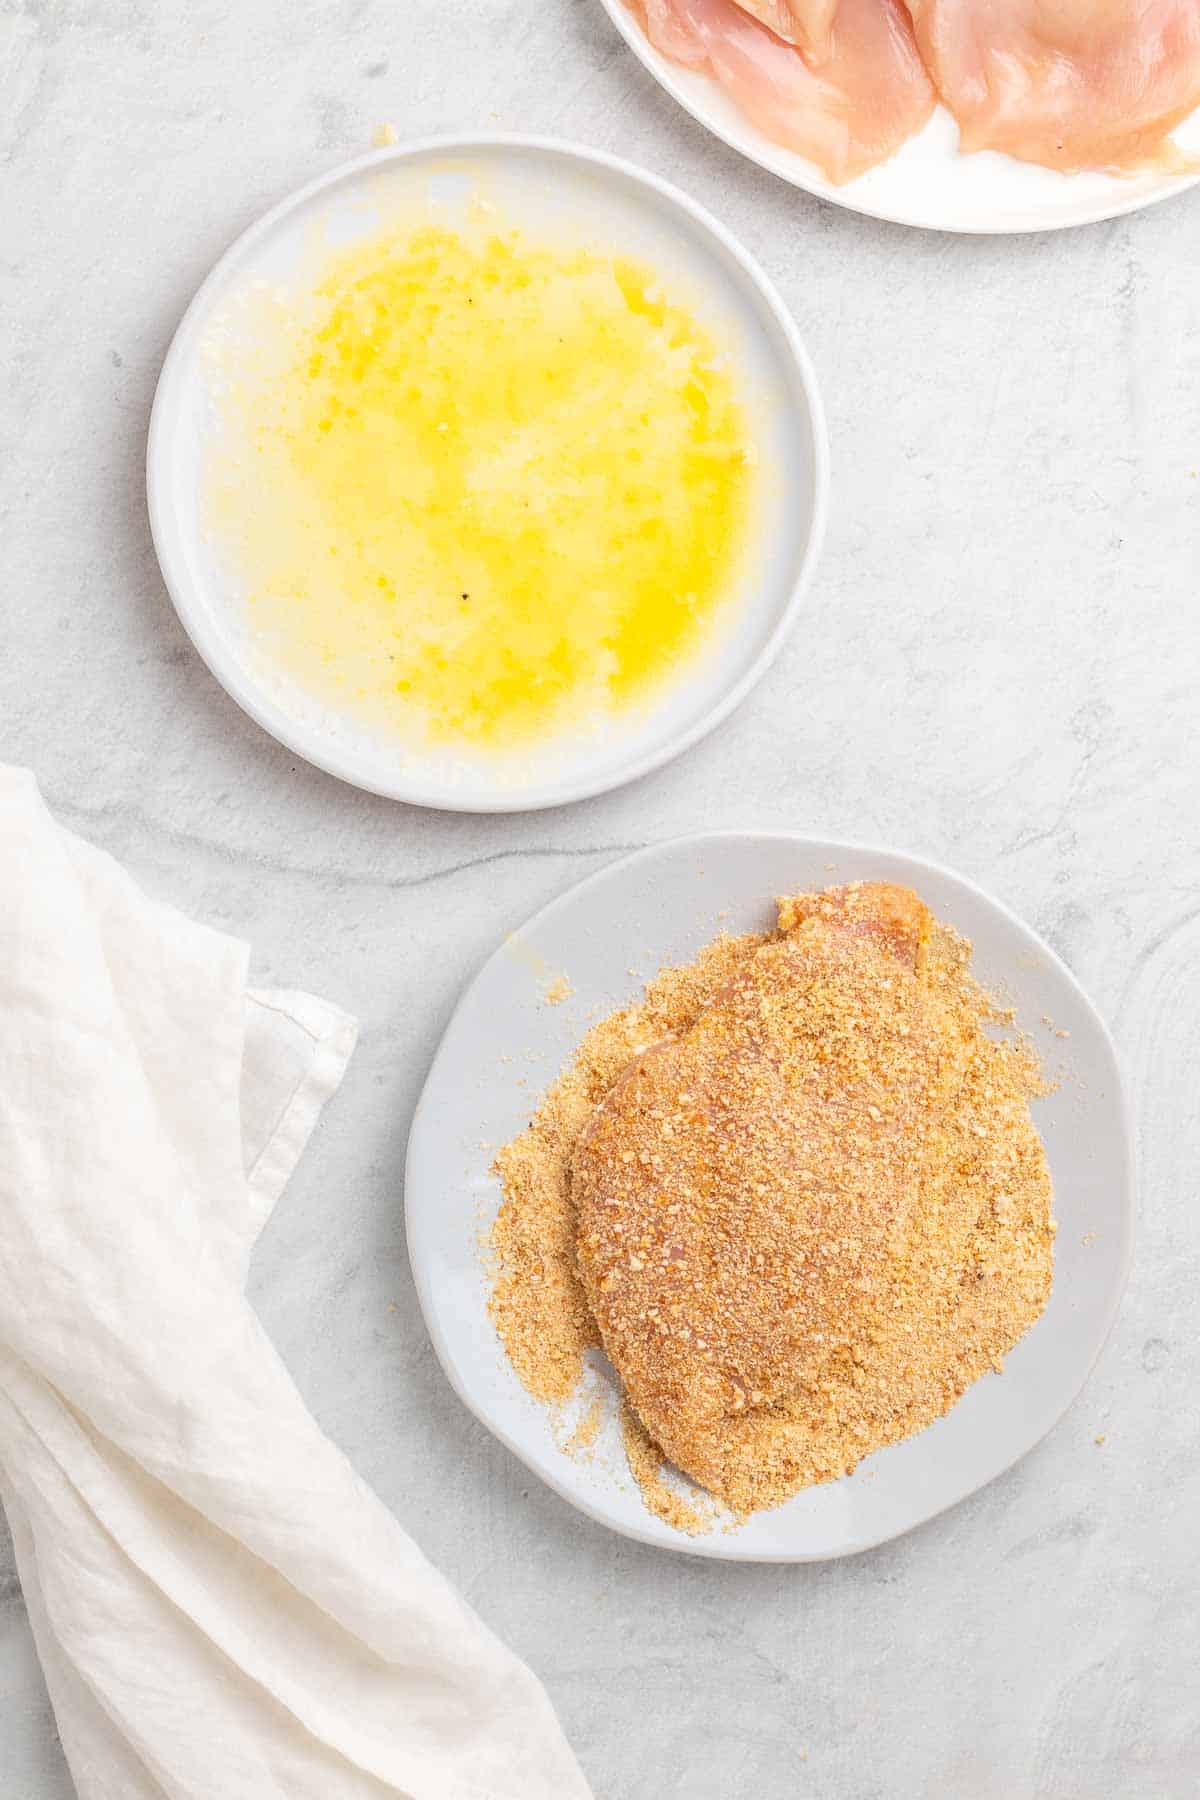 Flattened chicken breast on a white plate of low-carb breadcrumbs next to a white plate of the lemon and butter mixture, as seen from above